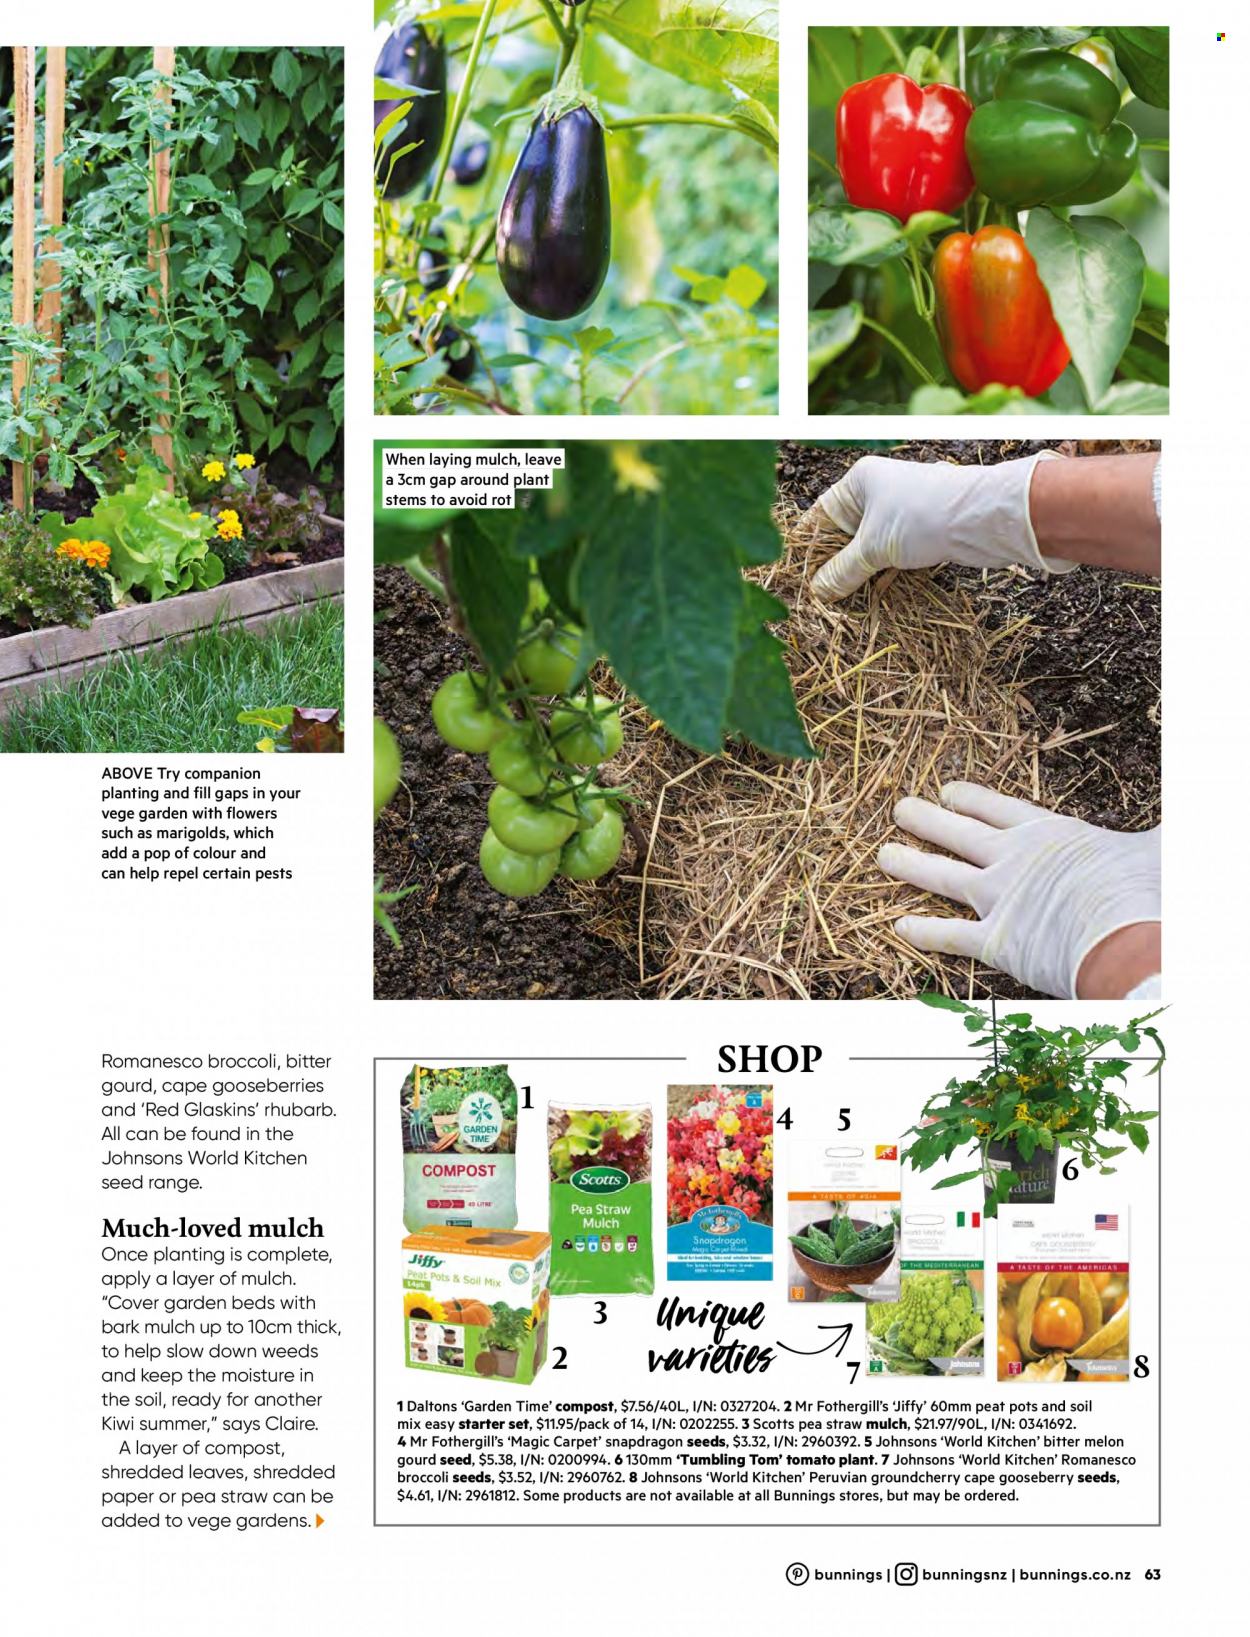 thumbnail - Bunnings Warehouse mailer - Sales products - straw, carpet, plant seeds, Jiffy, grow pots, garden mulch, compost. Page 63.